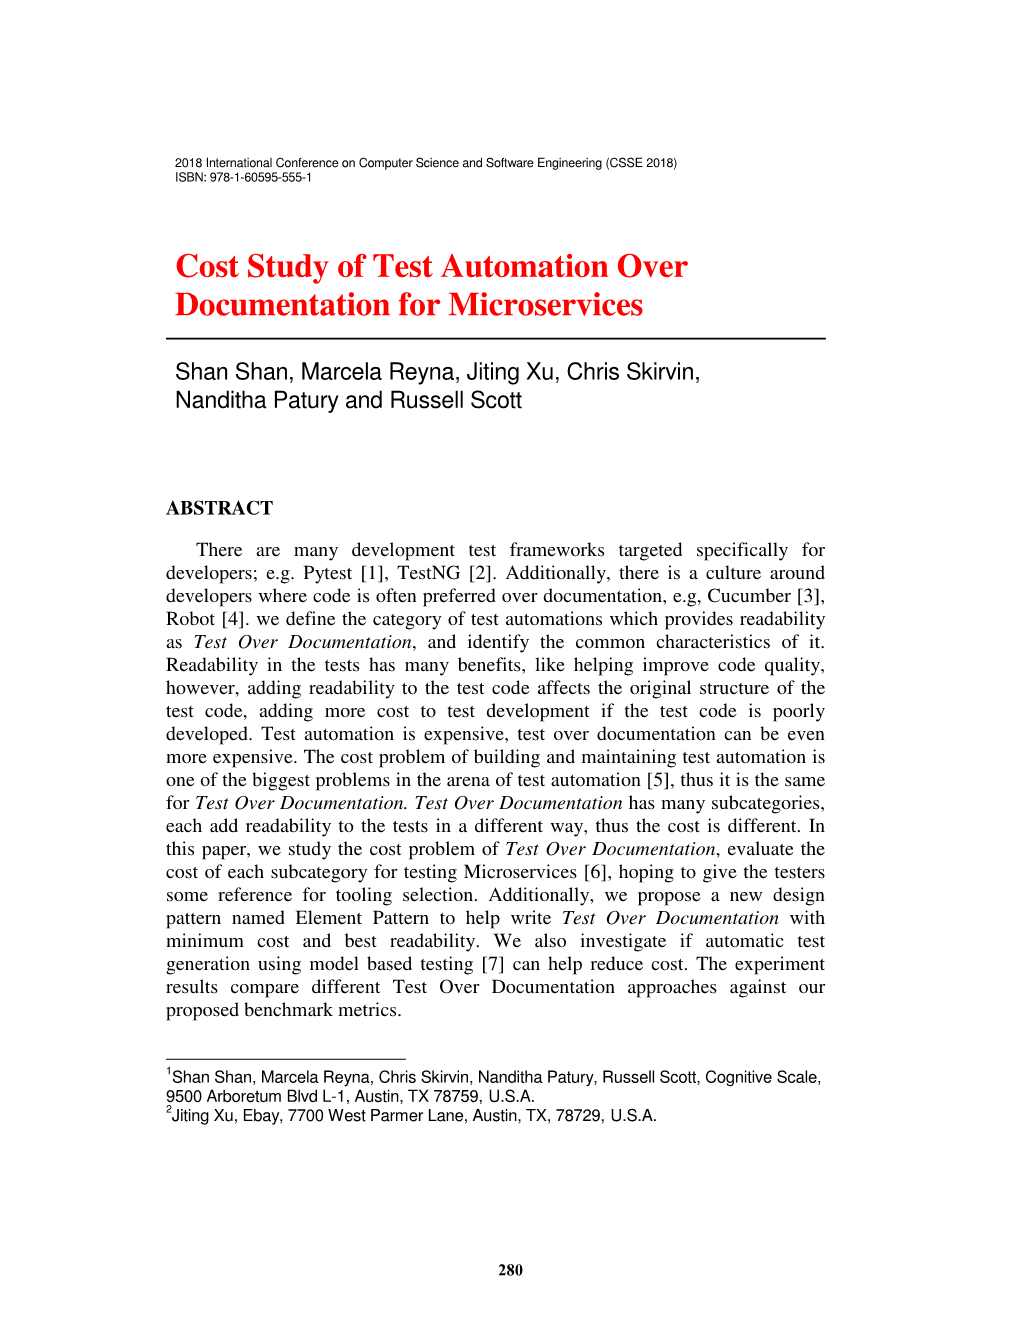 Cost Study of Test Automation Over Documentation for Microservices